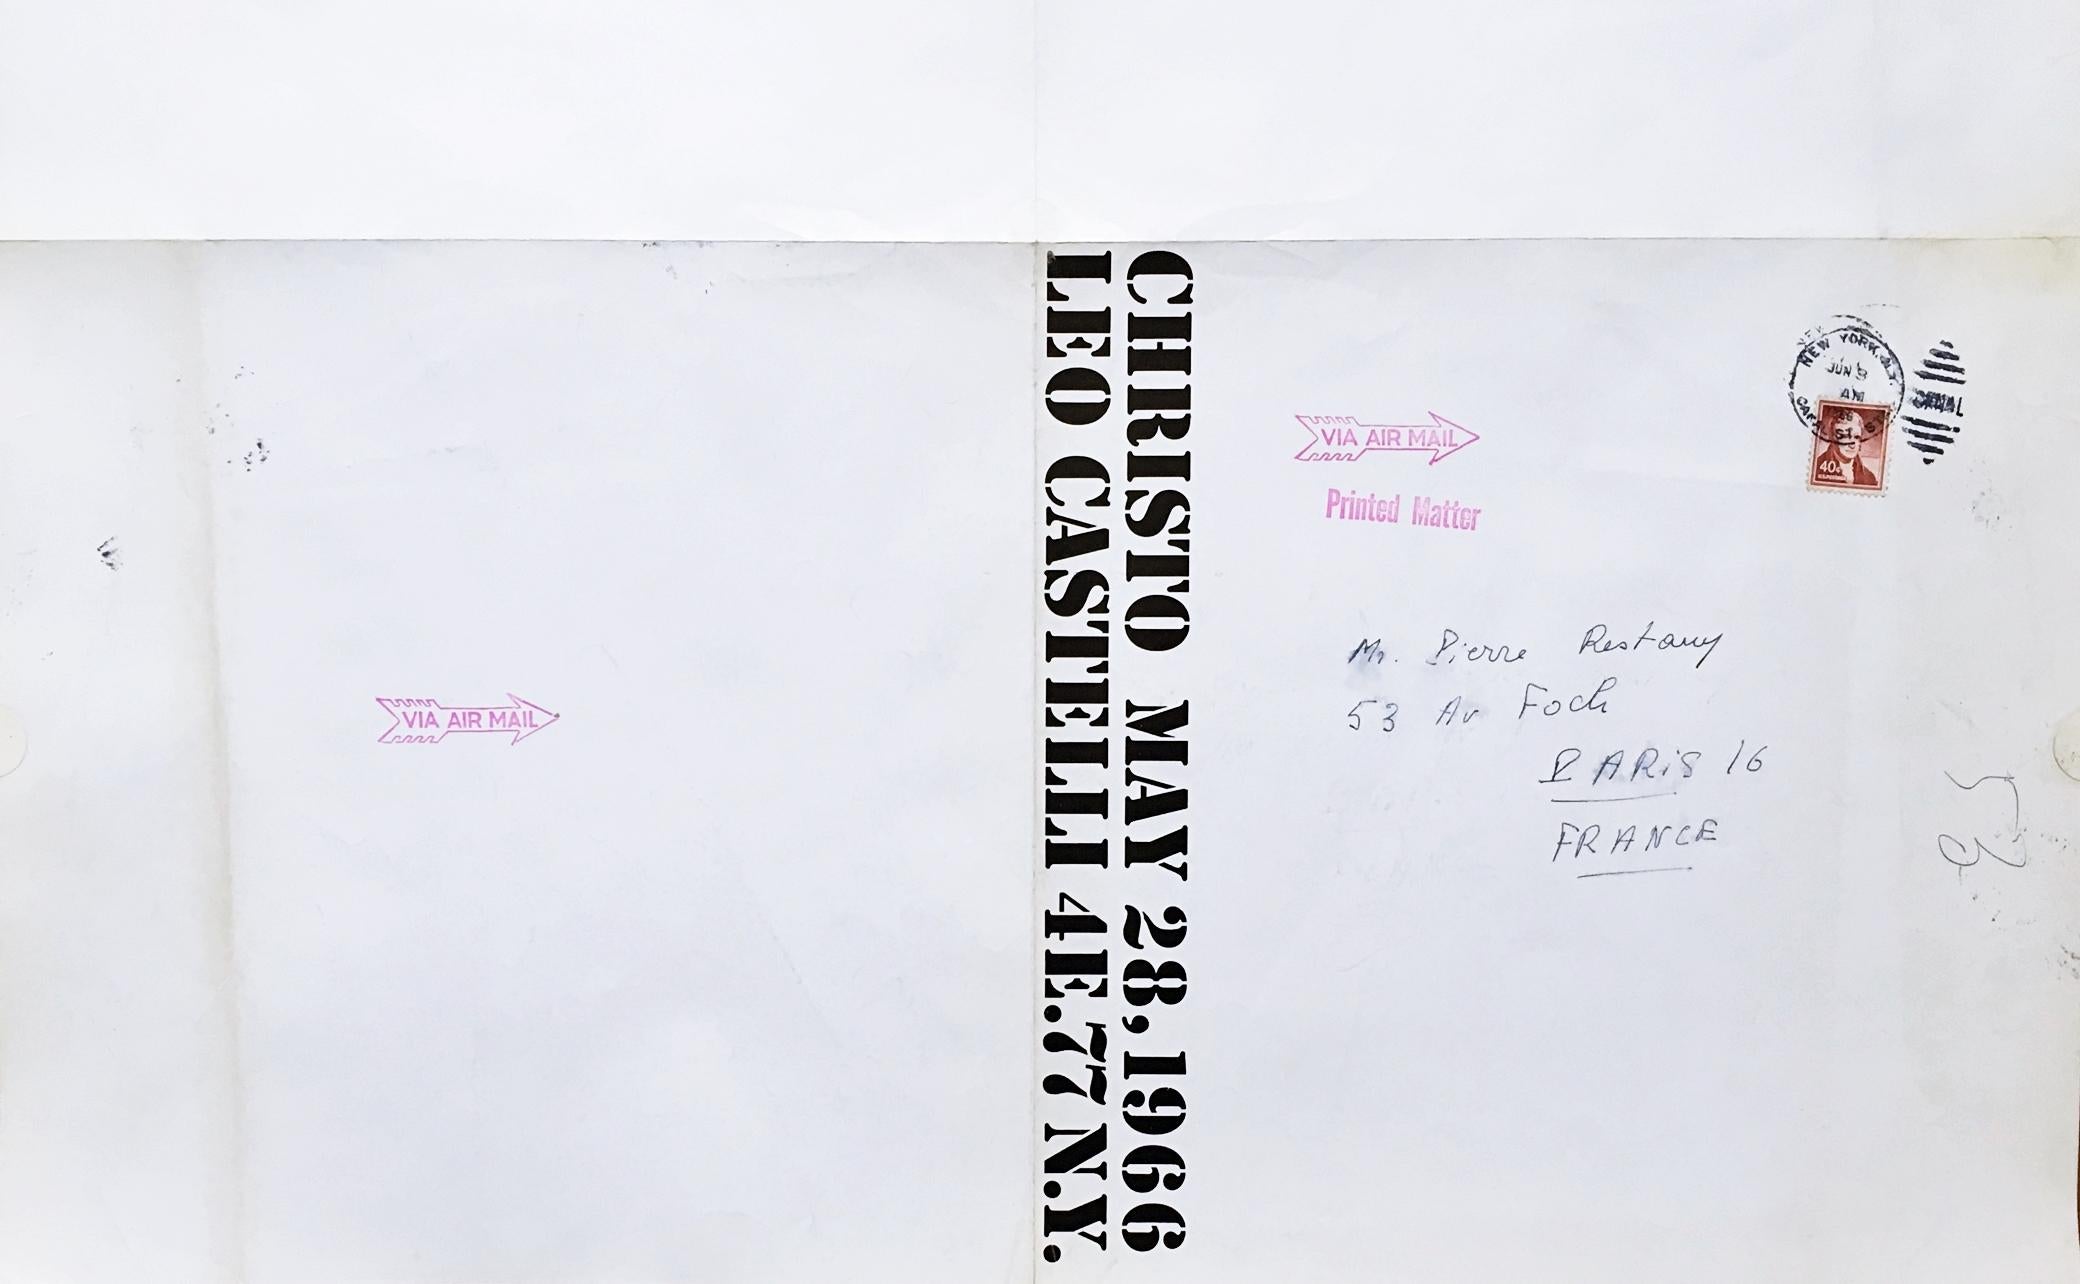 Christo at Leo Castelli Gallery, NY (Hand Signed) postmarked to Pierre Restany For Sale 4